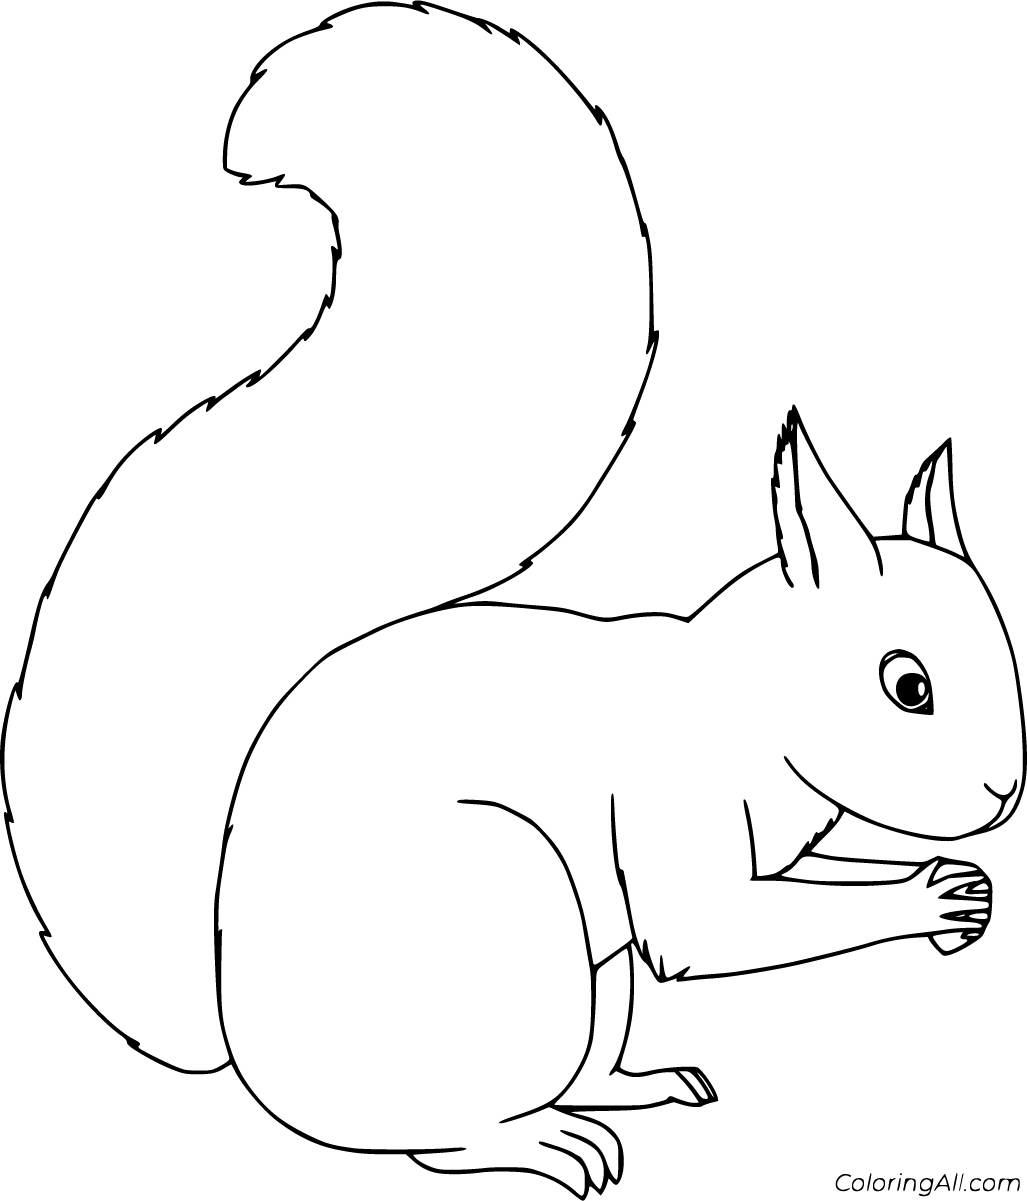 Top 25 Free Printable Squirrel Coloring Pages Online | MomJunction